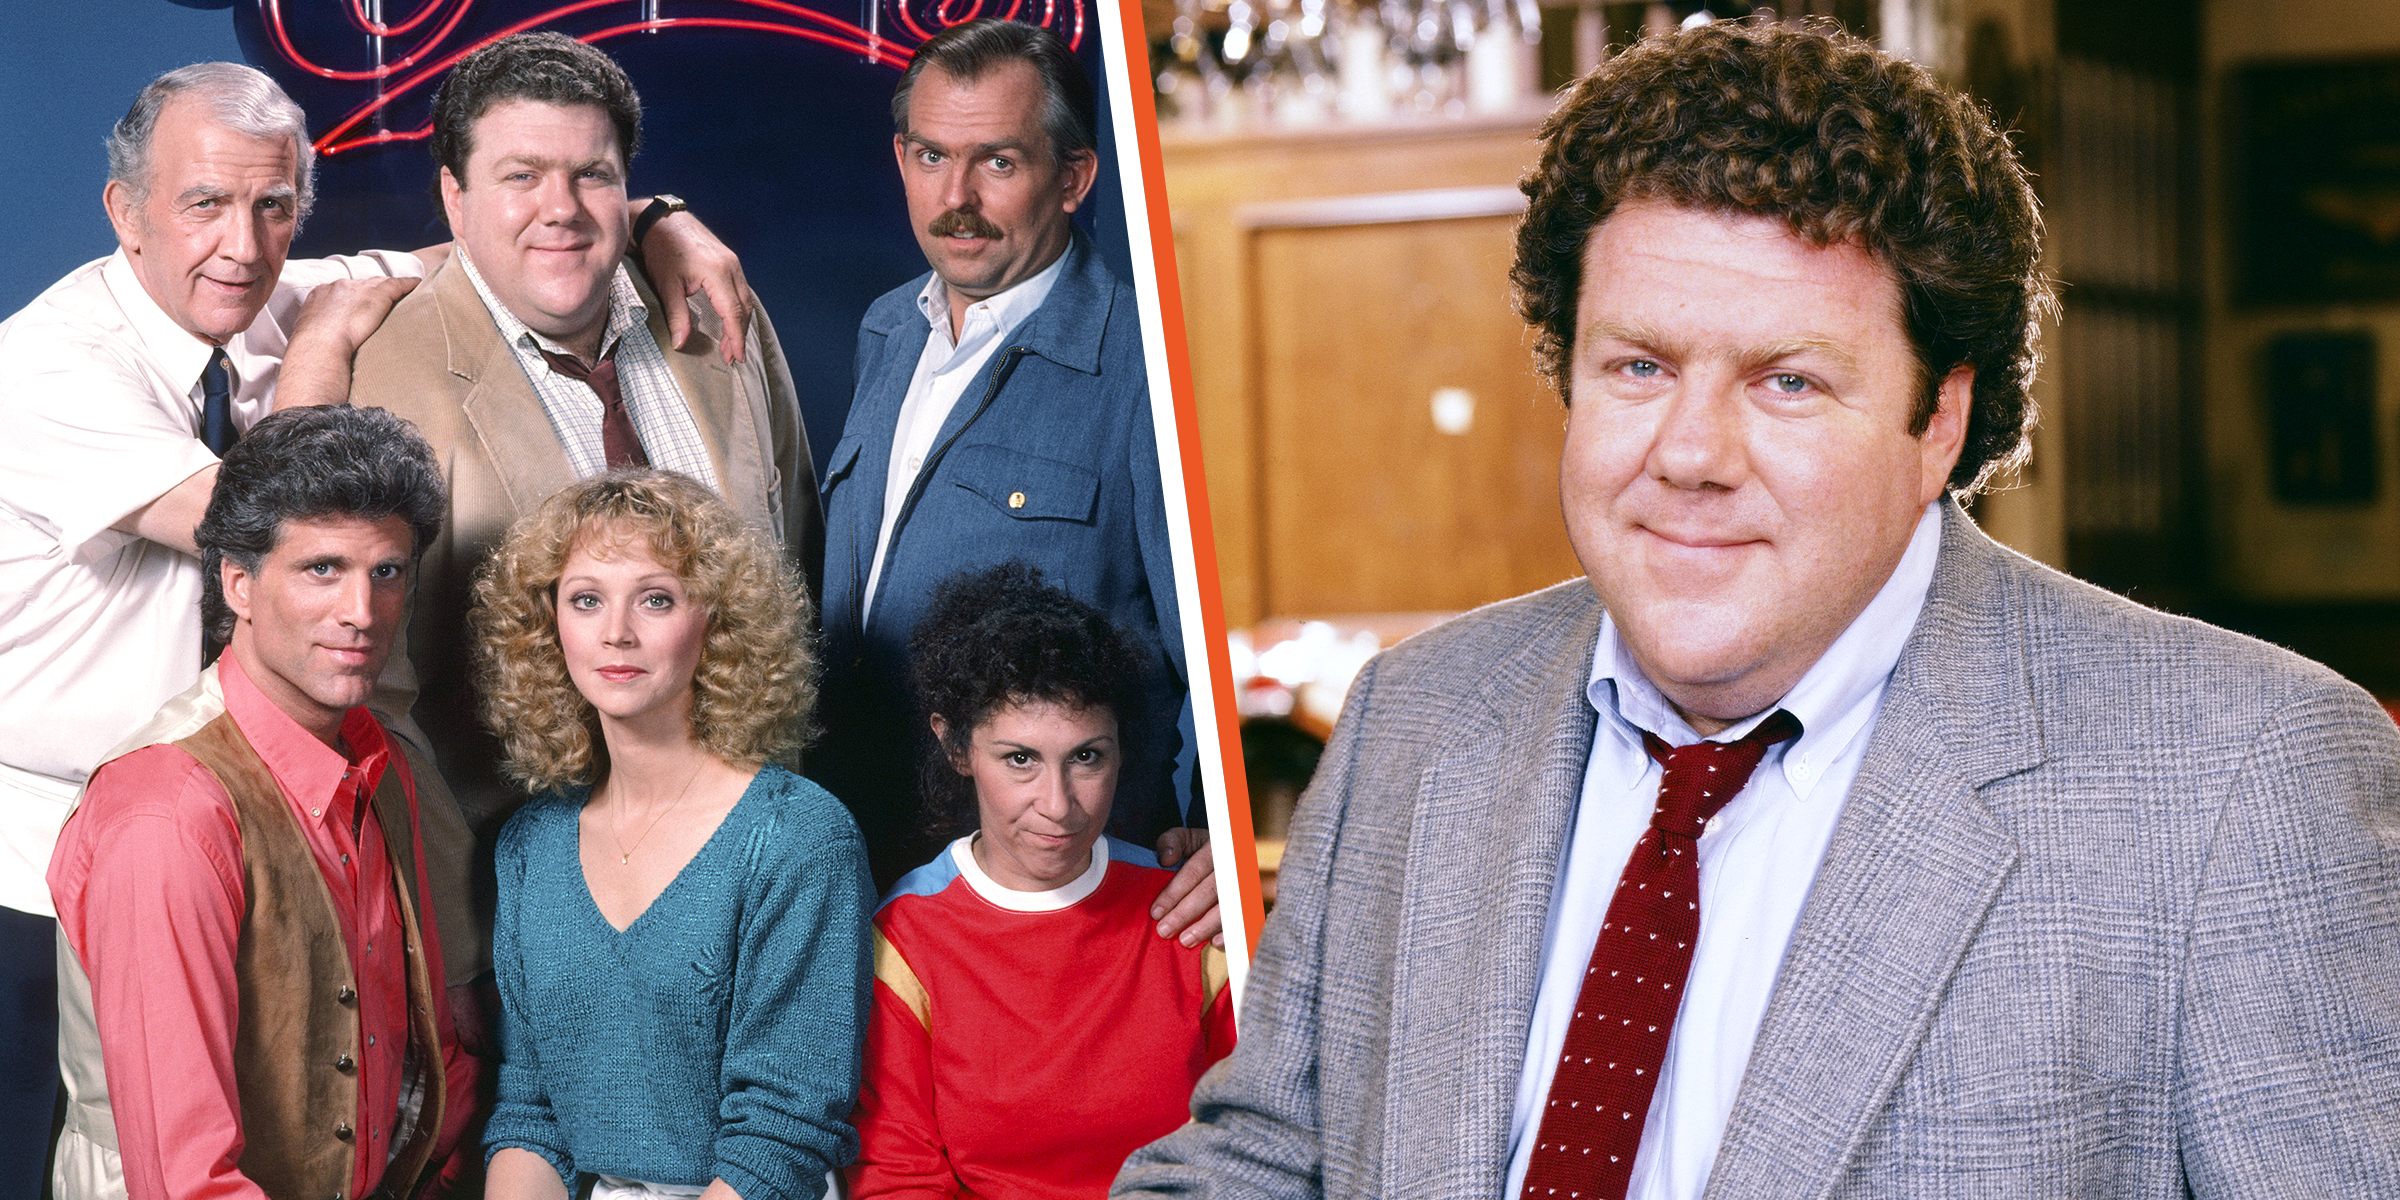 'Cheers Cast" | George Wendt | Source: Getty Images